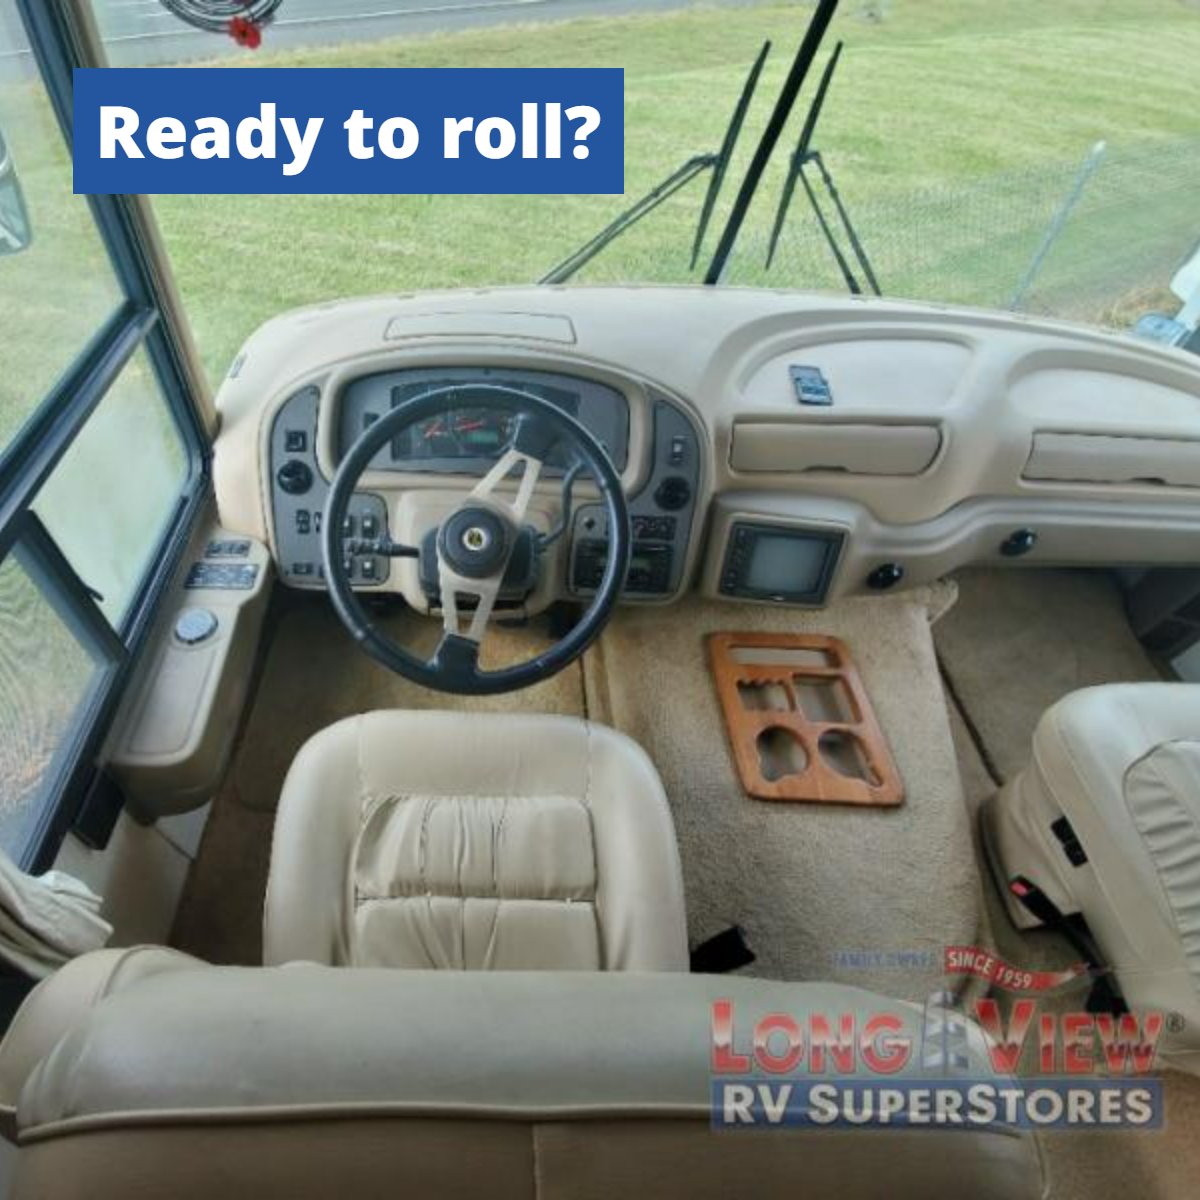 We've got the most exciting deals on RVs around, so if you need one more present before the year ends, come on down! #LongViewRVSuperstores #RVLife #CampLifestyle